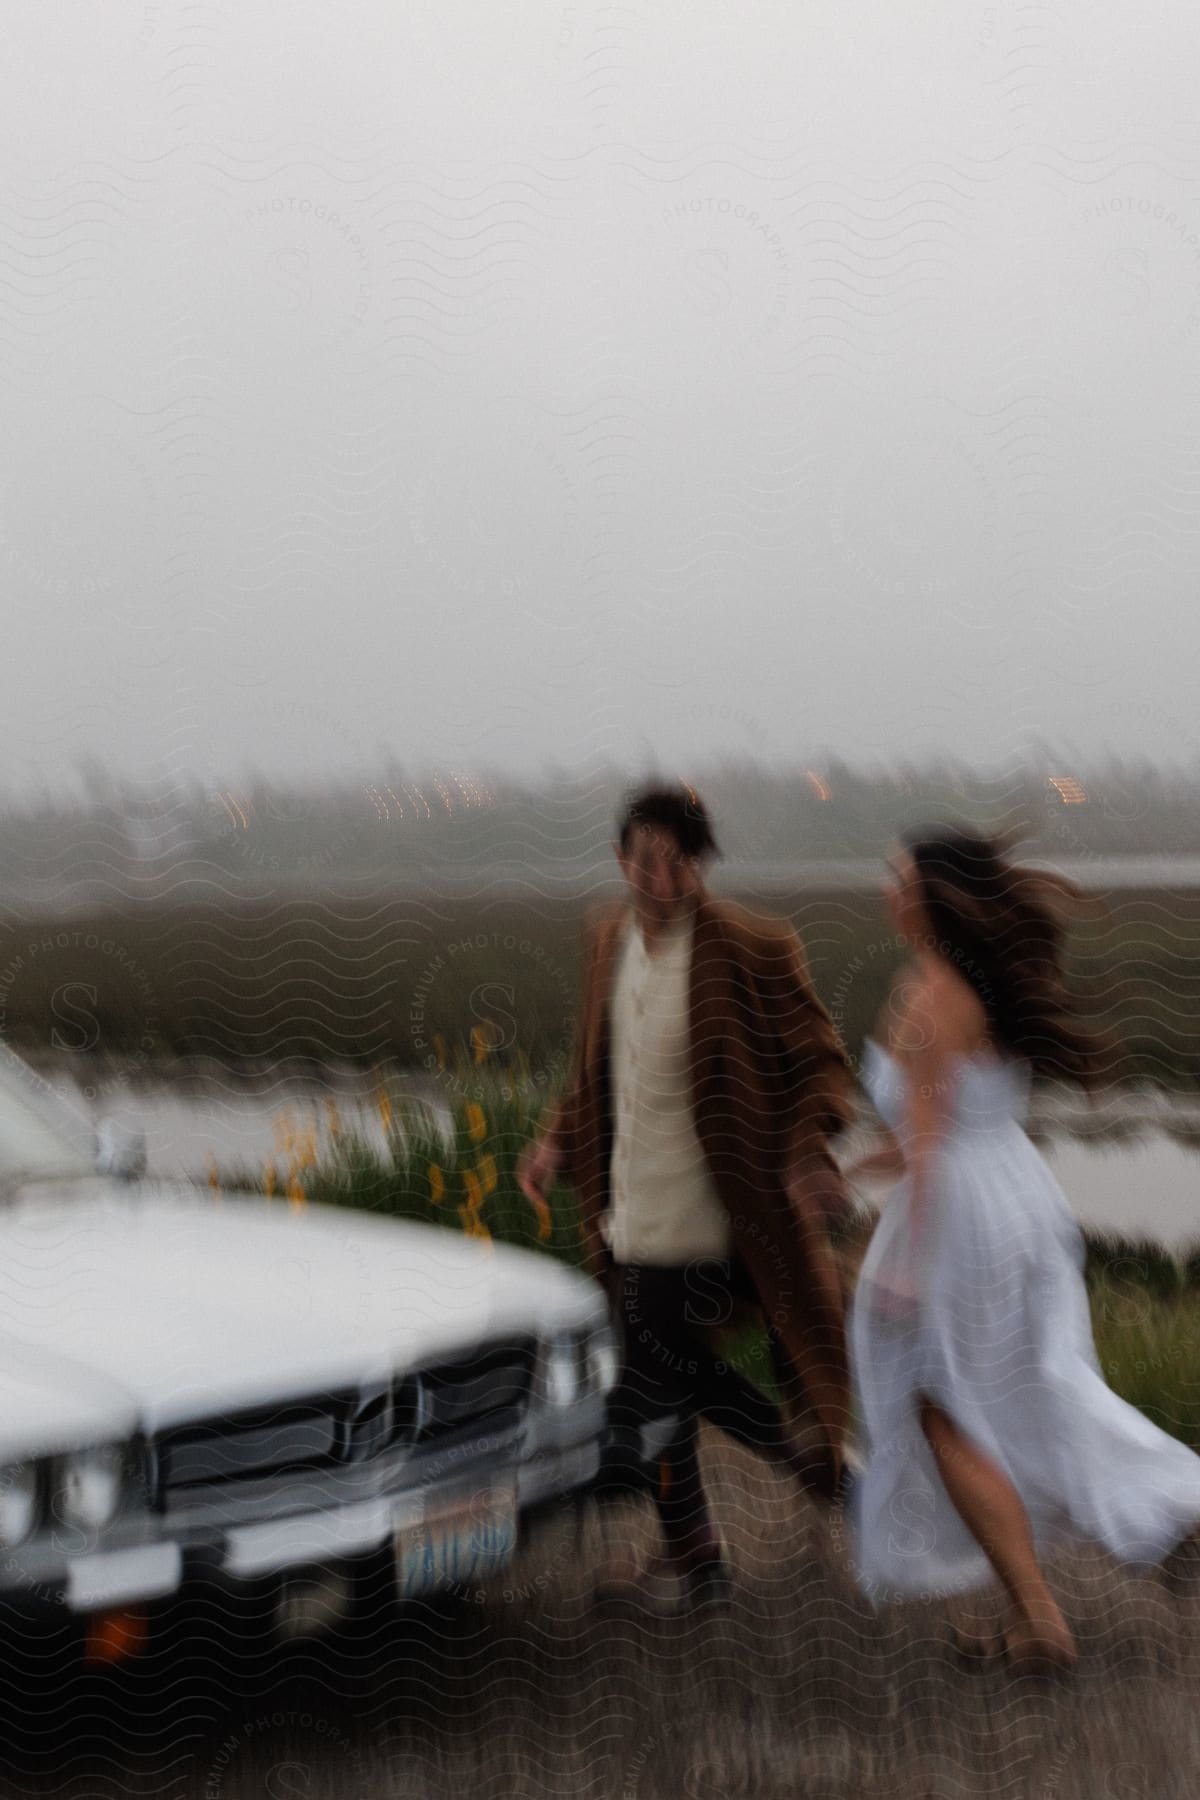 Man in brown jacket and white shirt holds womans hand in wedding dress walking to white car with city skyline in background in field